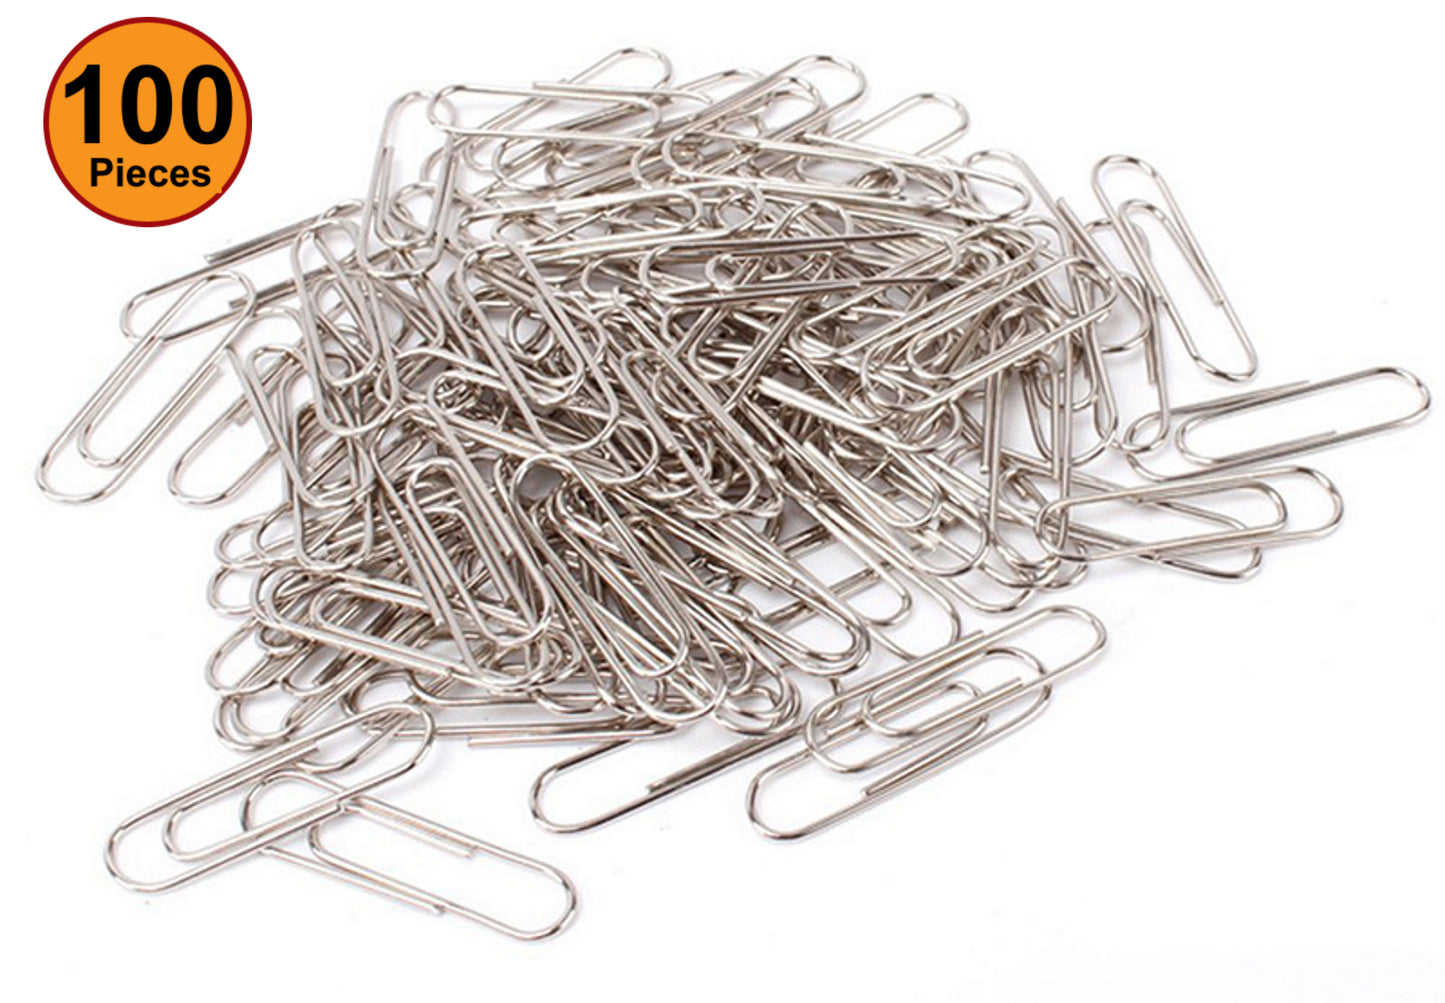 NiftyPlaza Large Jumbo Paper Clips 100 pcs (50mm) Silver Smooth Finish, Craft, Home, School, Office